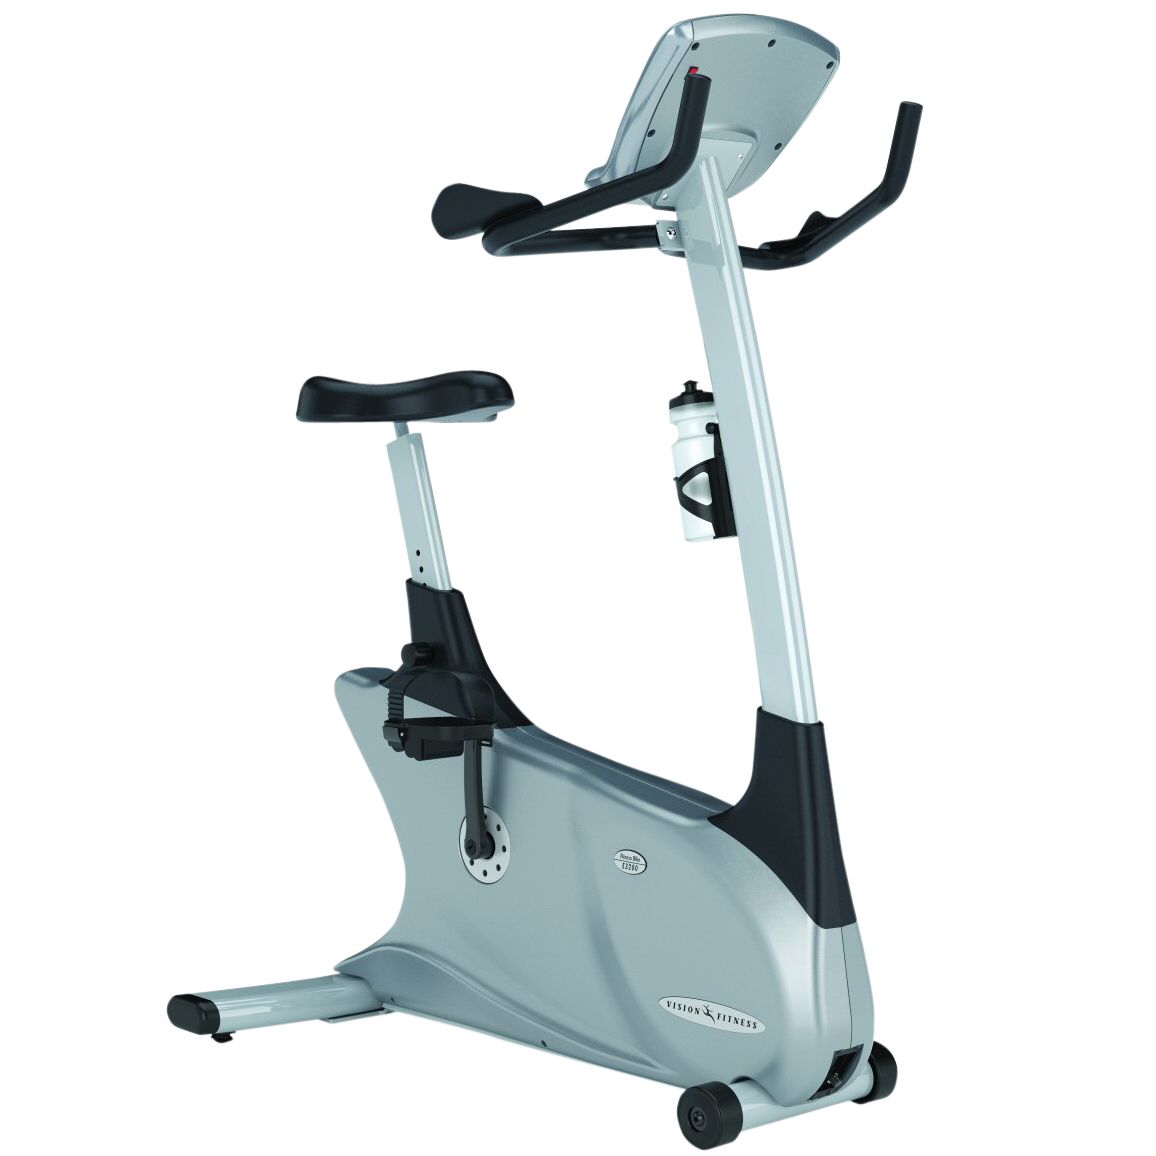 Vision Fitness E3200 Upright Exercise Bike with Simple Console at John Lewis